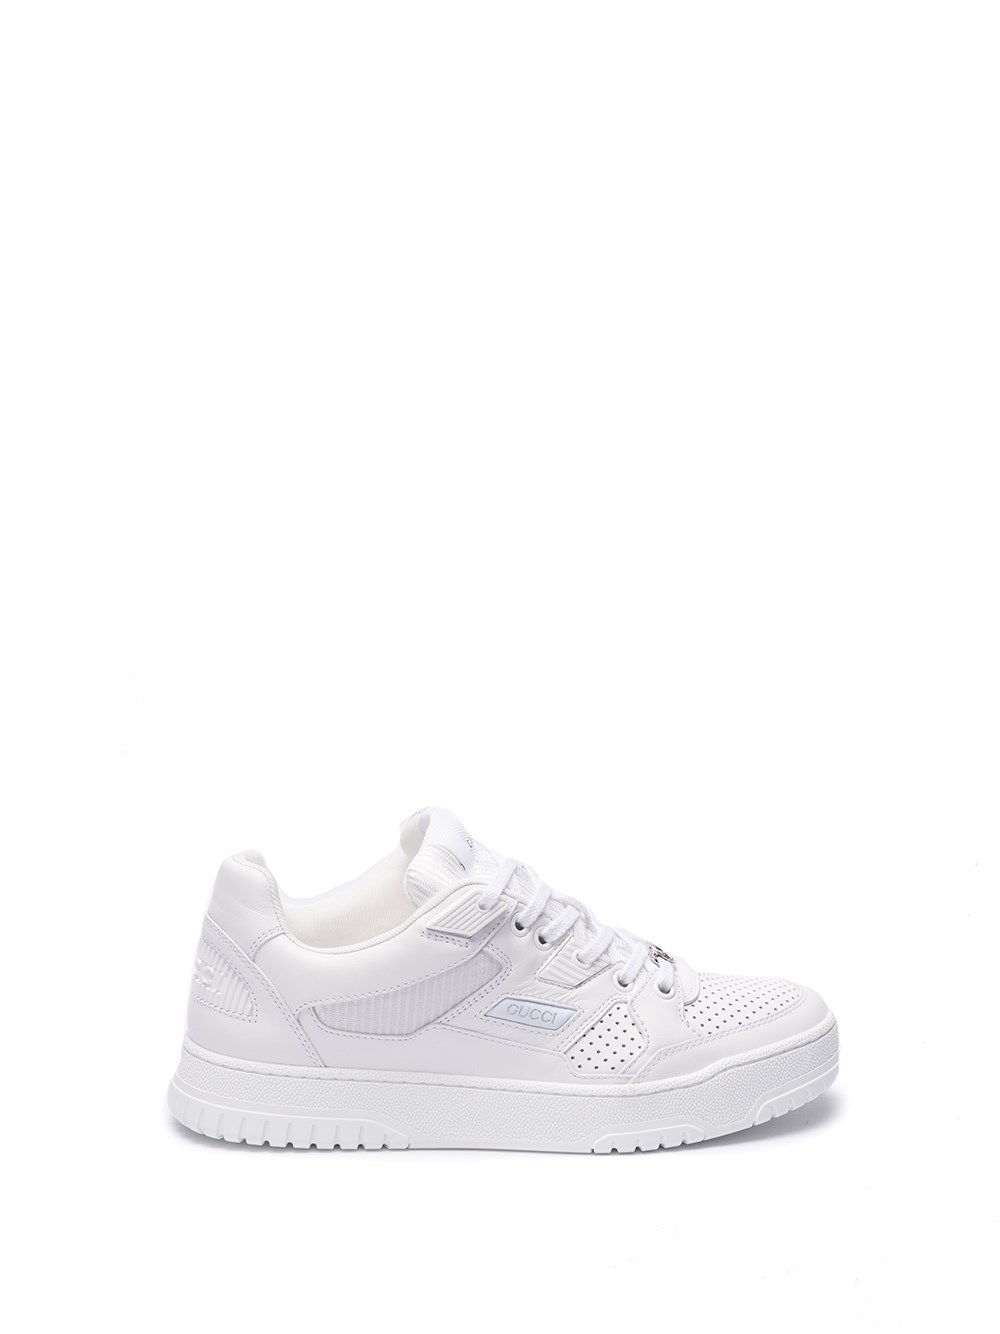 Gucci Jones Leather Sneakers In White